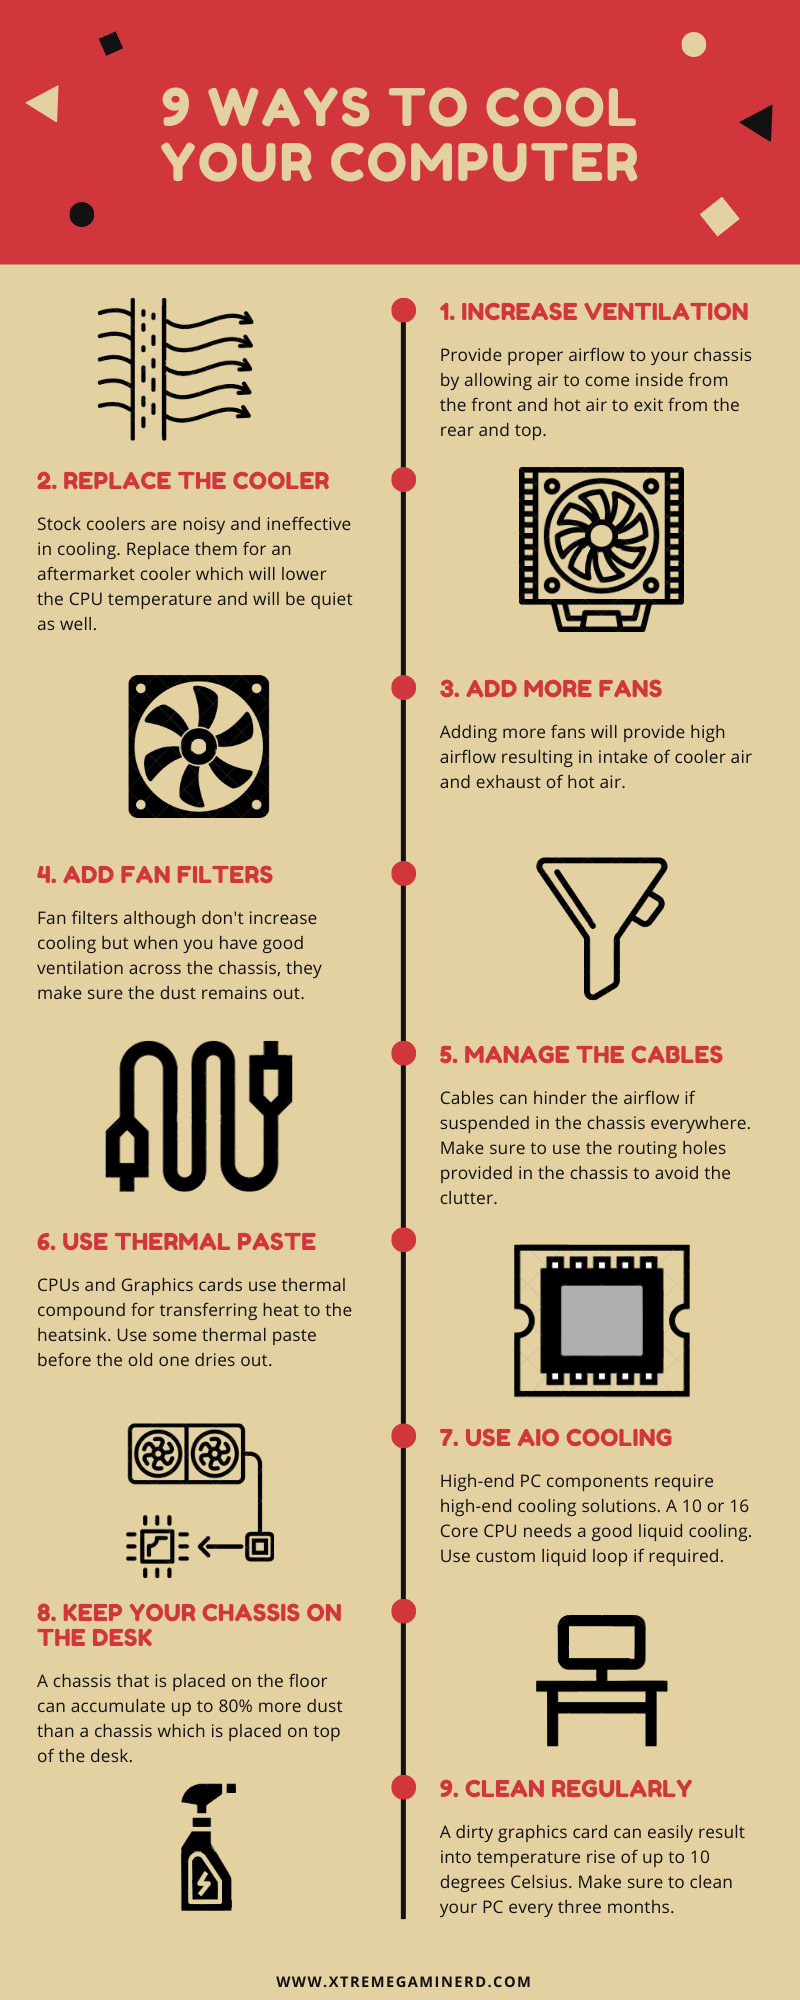 9 ways to cool your computer